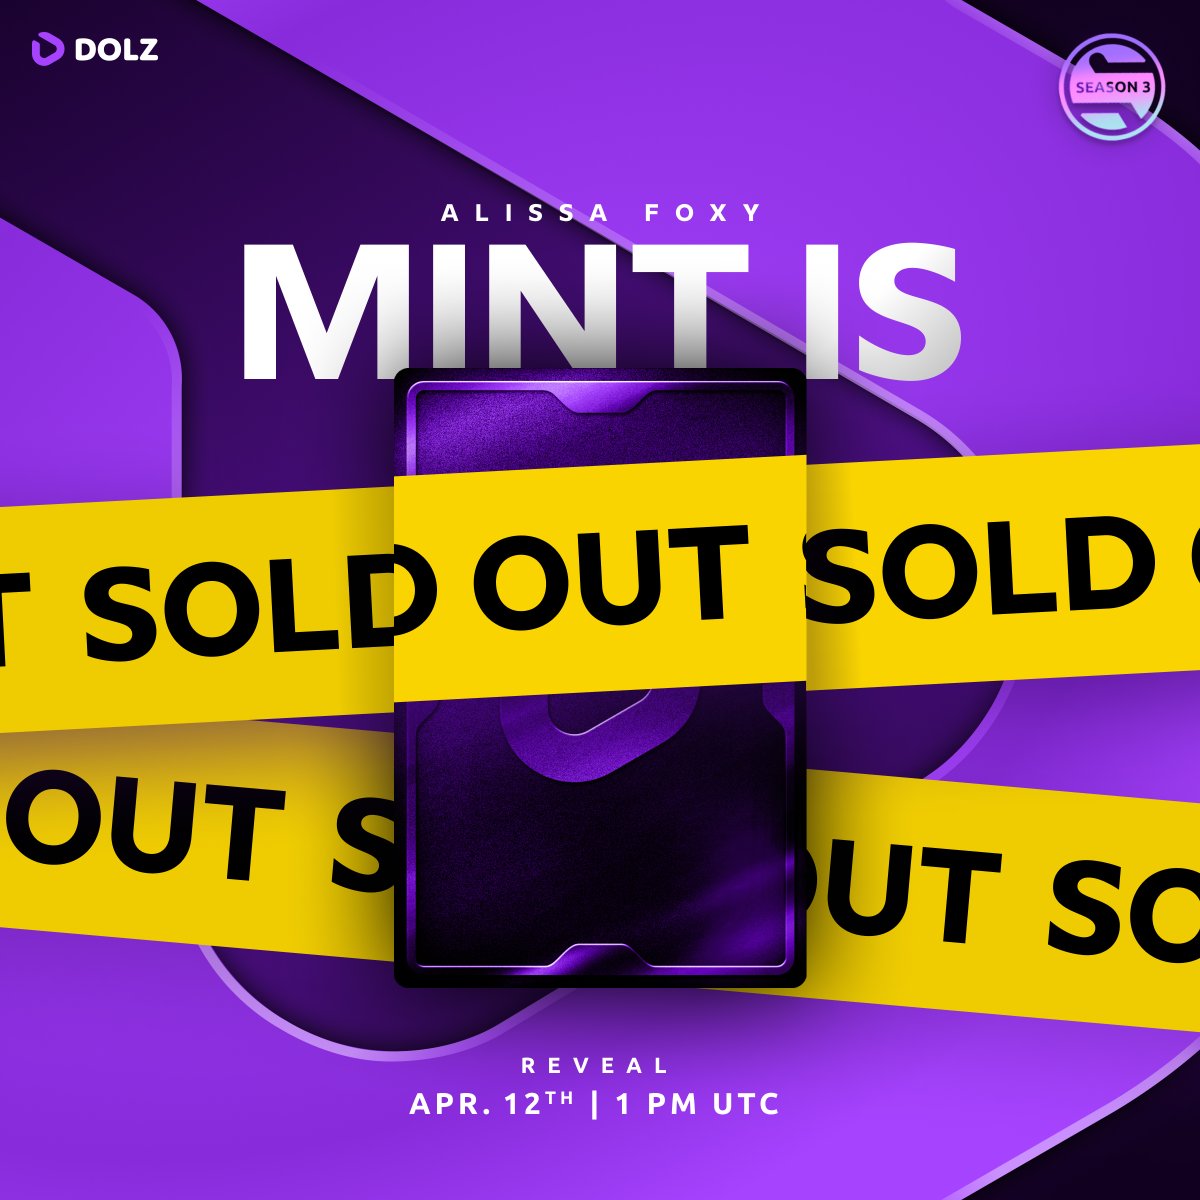 💥 Already SOLD OUT! REVEAL | April 12th at 1 pm UTC. @alissa__foxy’s XR Card has been SOLD OUT within 2 MINUTES! 🤯 $DOLZ fam, how many of you have joined her sexy kingdom? 👇